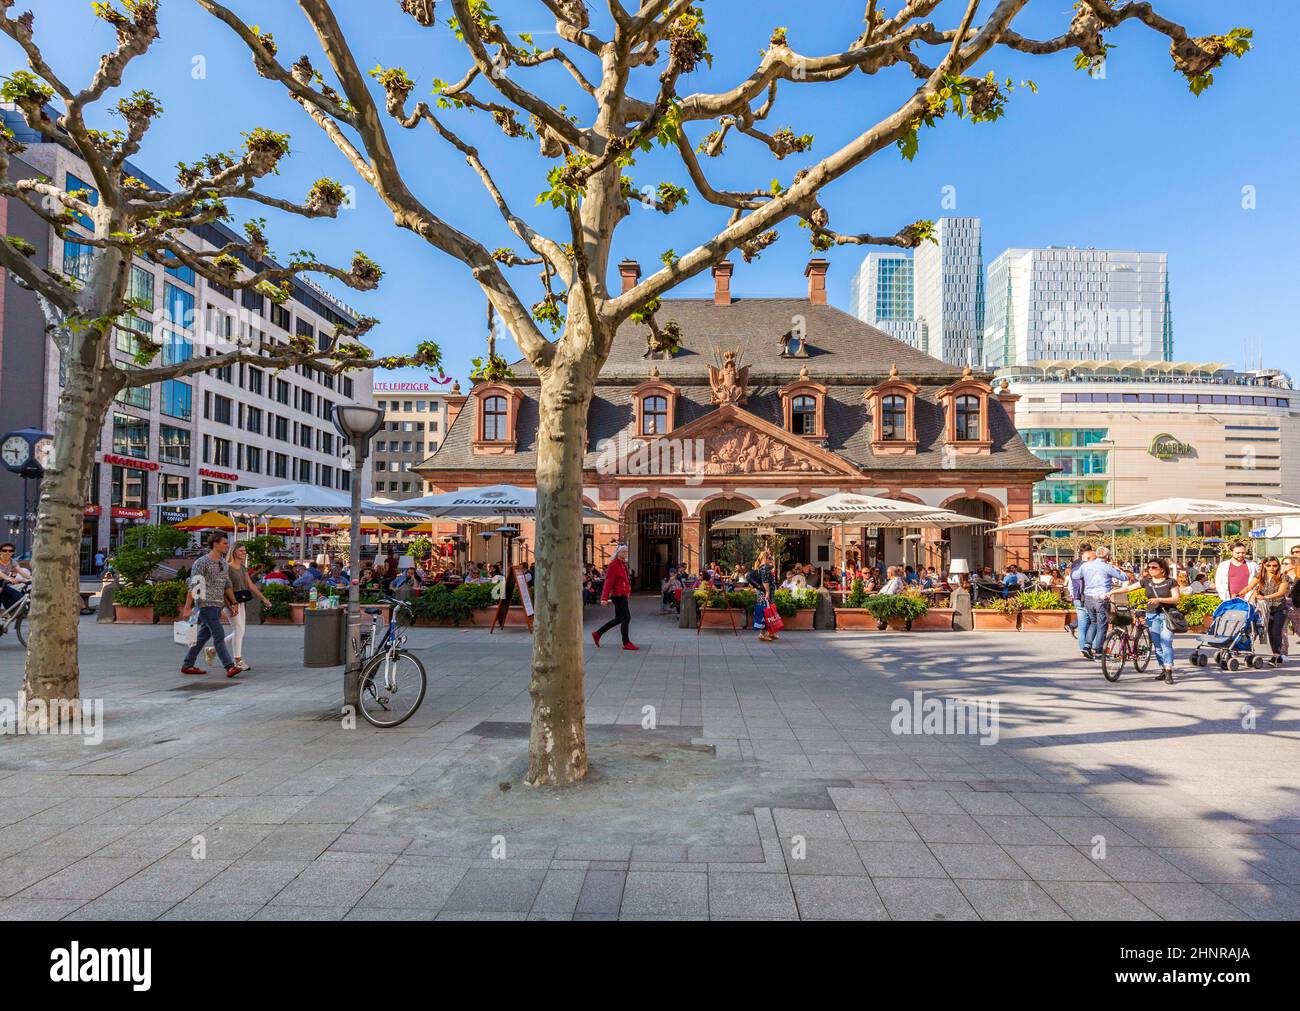 people enjoy the sunny day in Frankfurt at cafe Hauptwache Stock Photo